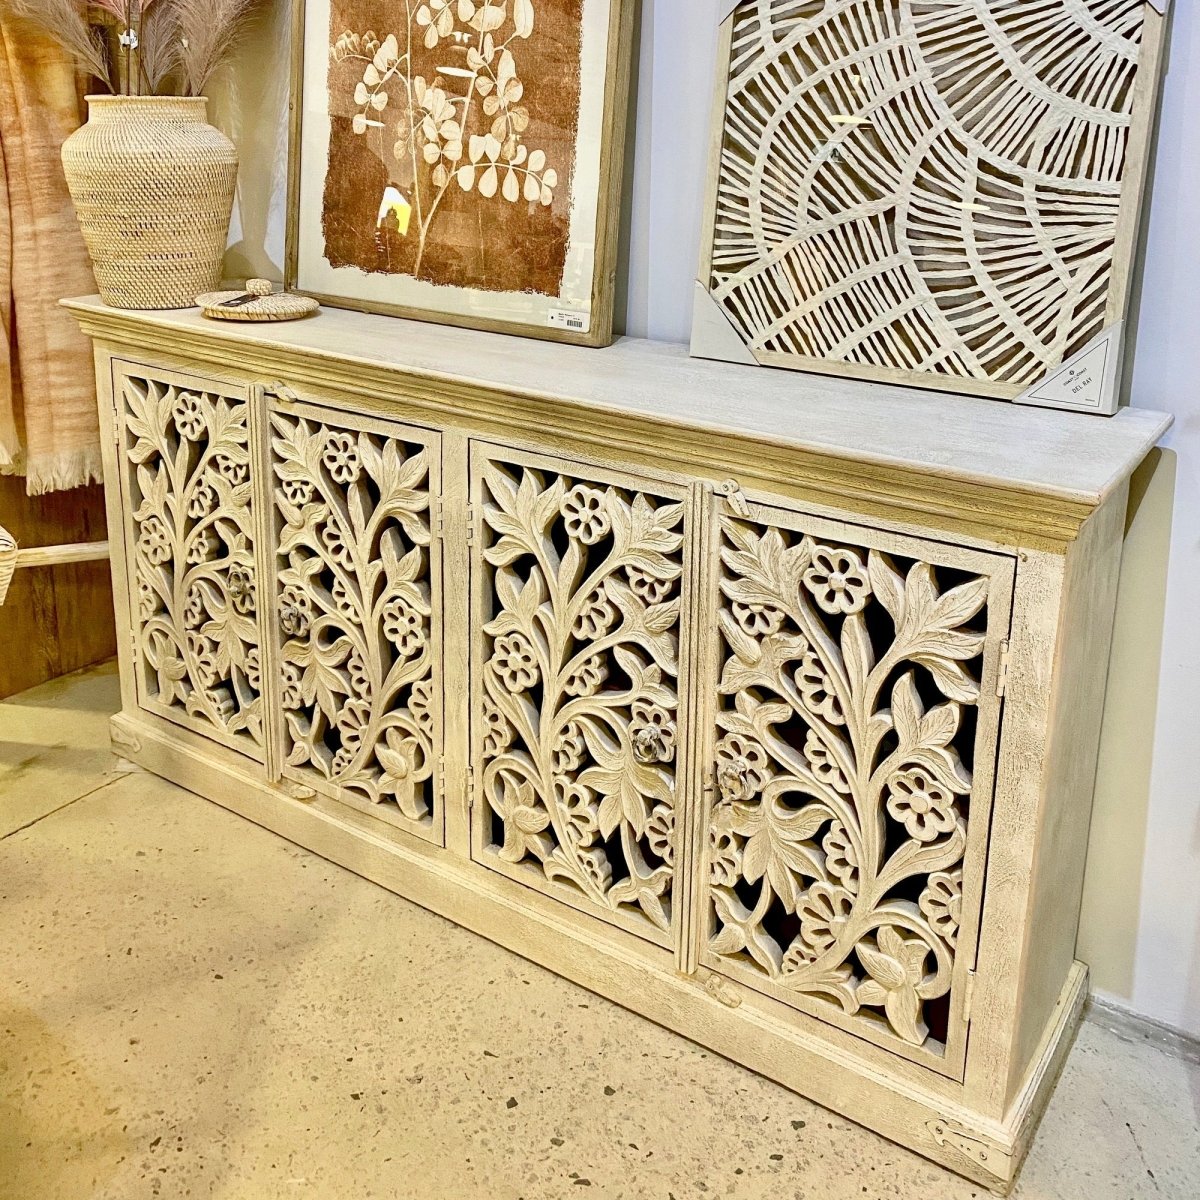 Handmade Wood Carving Buffet Table | Hand carved Antique Sideboard Buffet & Sideboard - Bone Inlay Furnitures